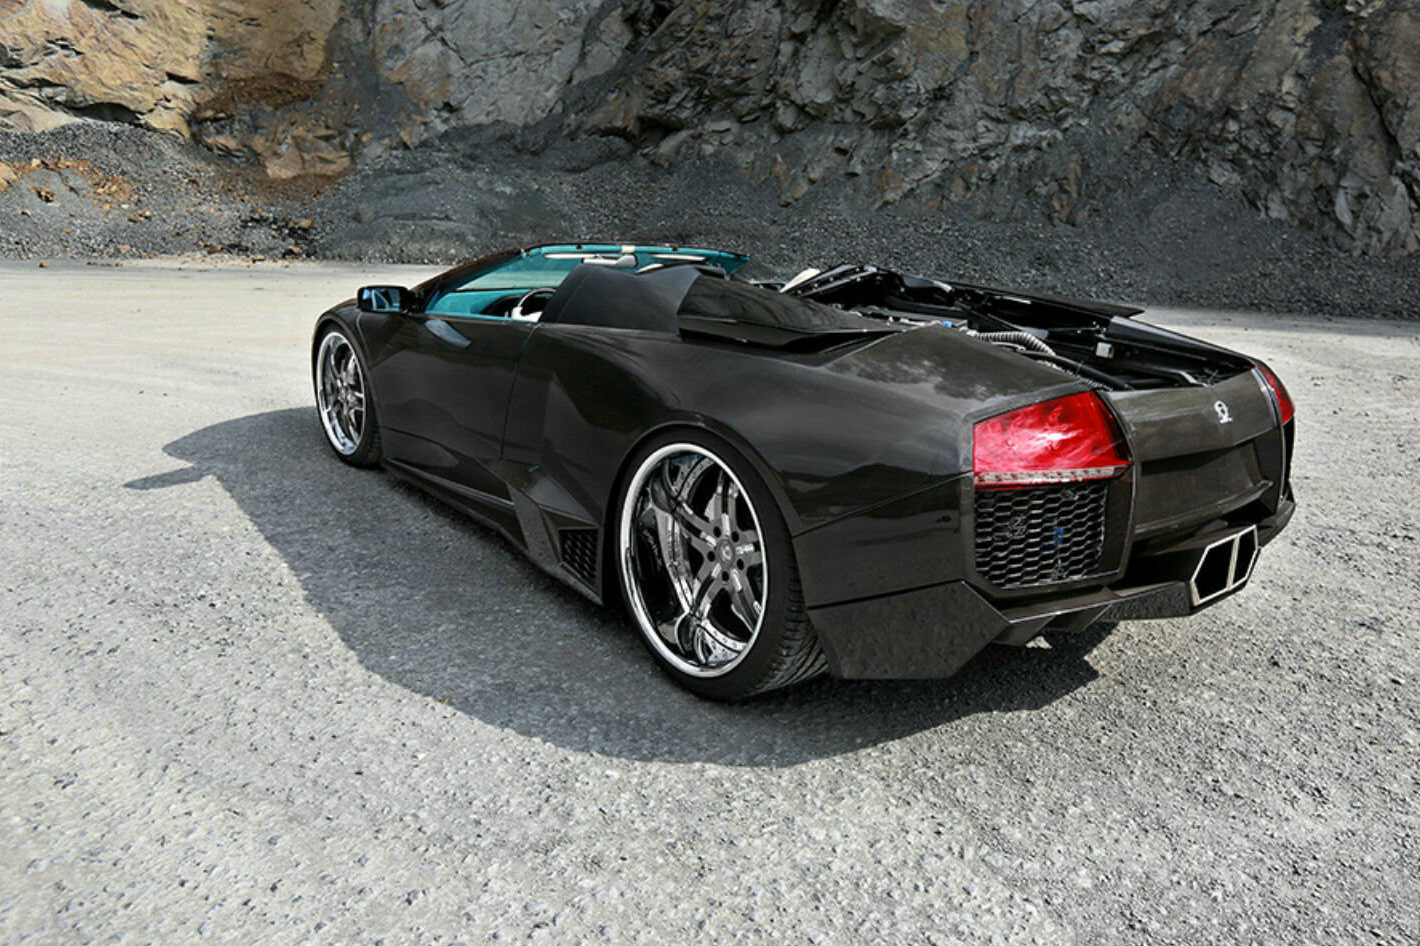 Perfectly tuned Lamborghini Murcielago: “I wanted to transform it into more  aggressive and forceful version” - (Сars)